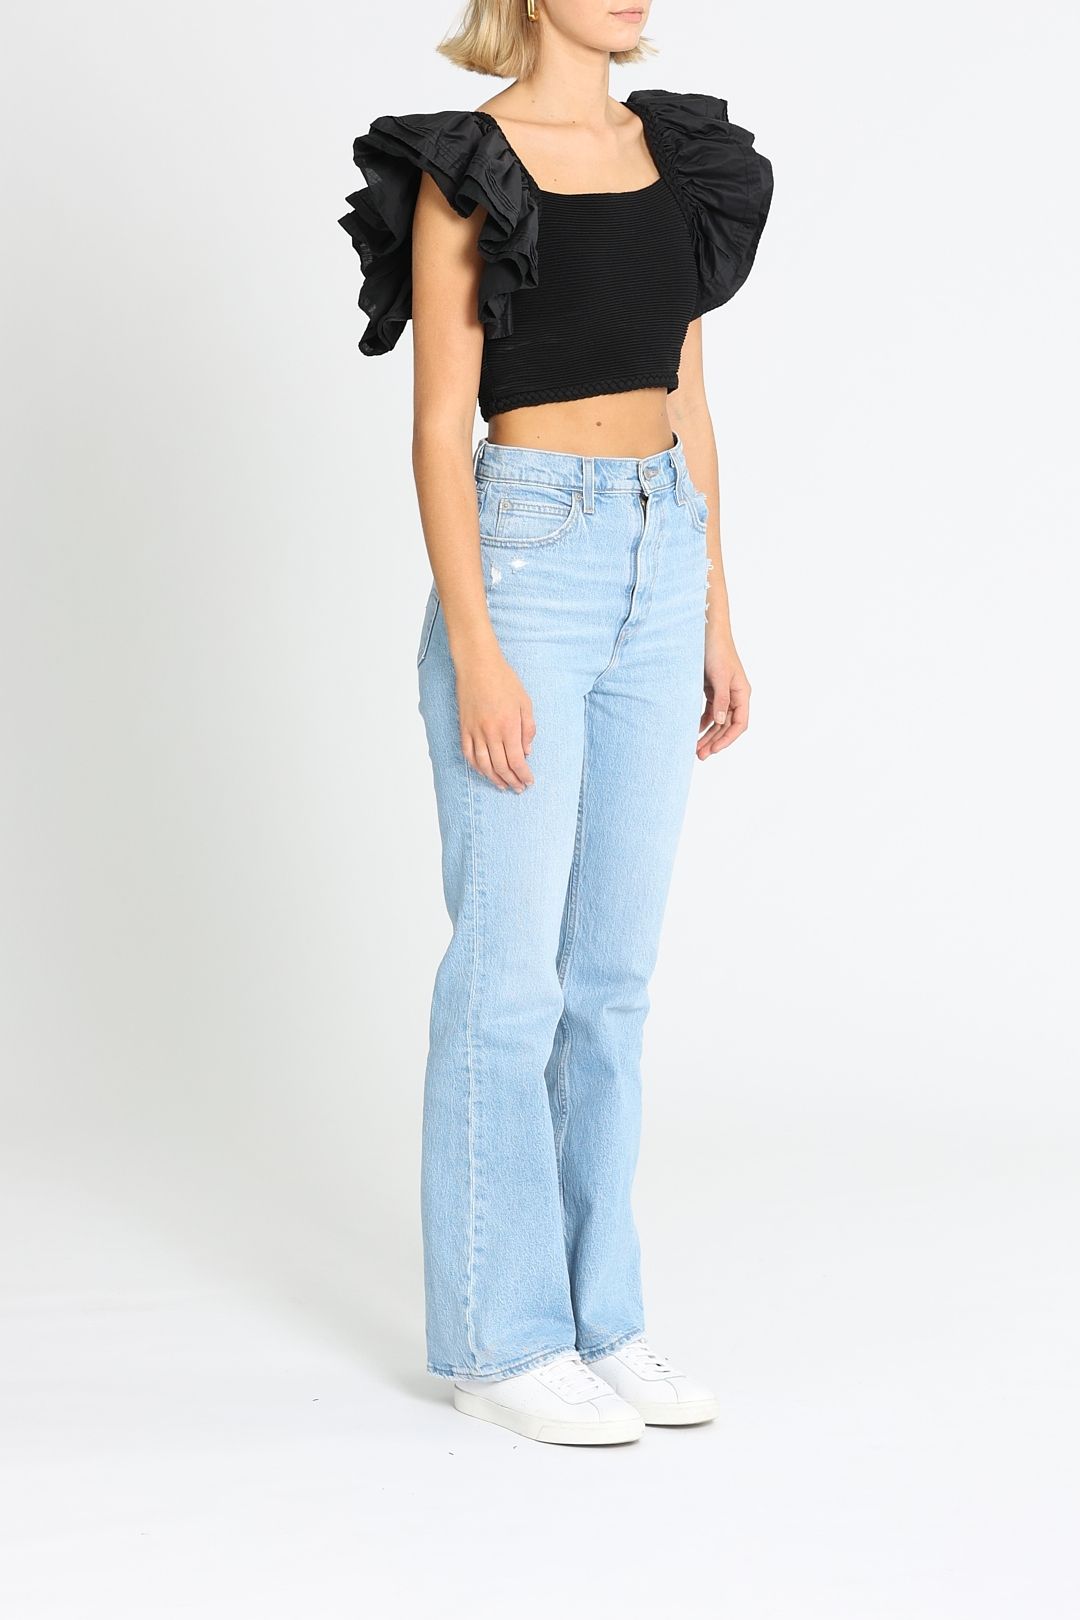 Aje Corinne Knit Bodice Crop Top Frill Sleeves